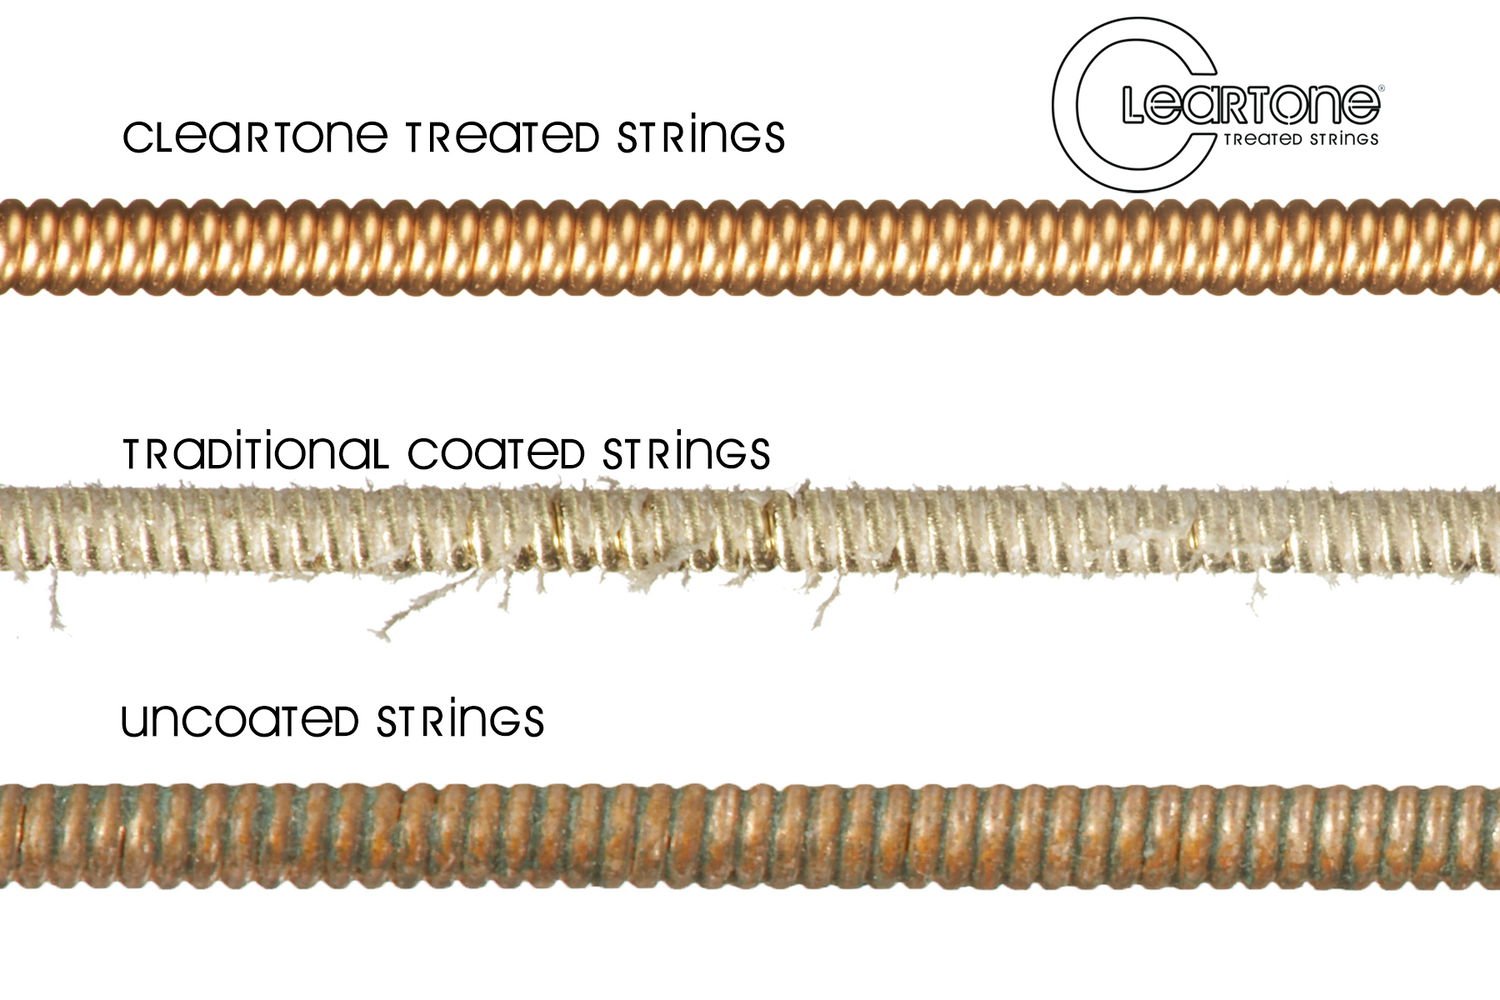 Visual comparison of Cleartone treated strings looking brand new versus traditional coated strings and uncoated strings, which display signs of wear and tarnish